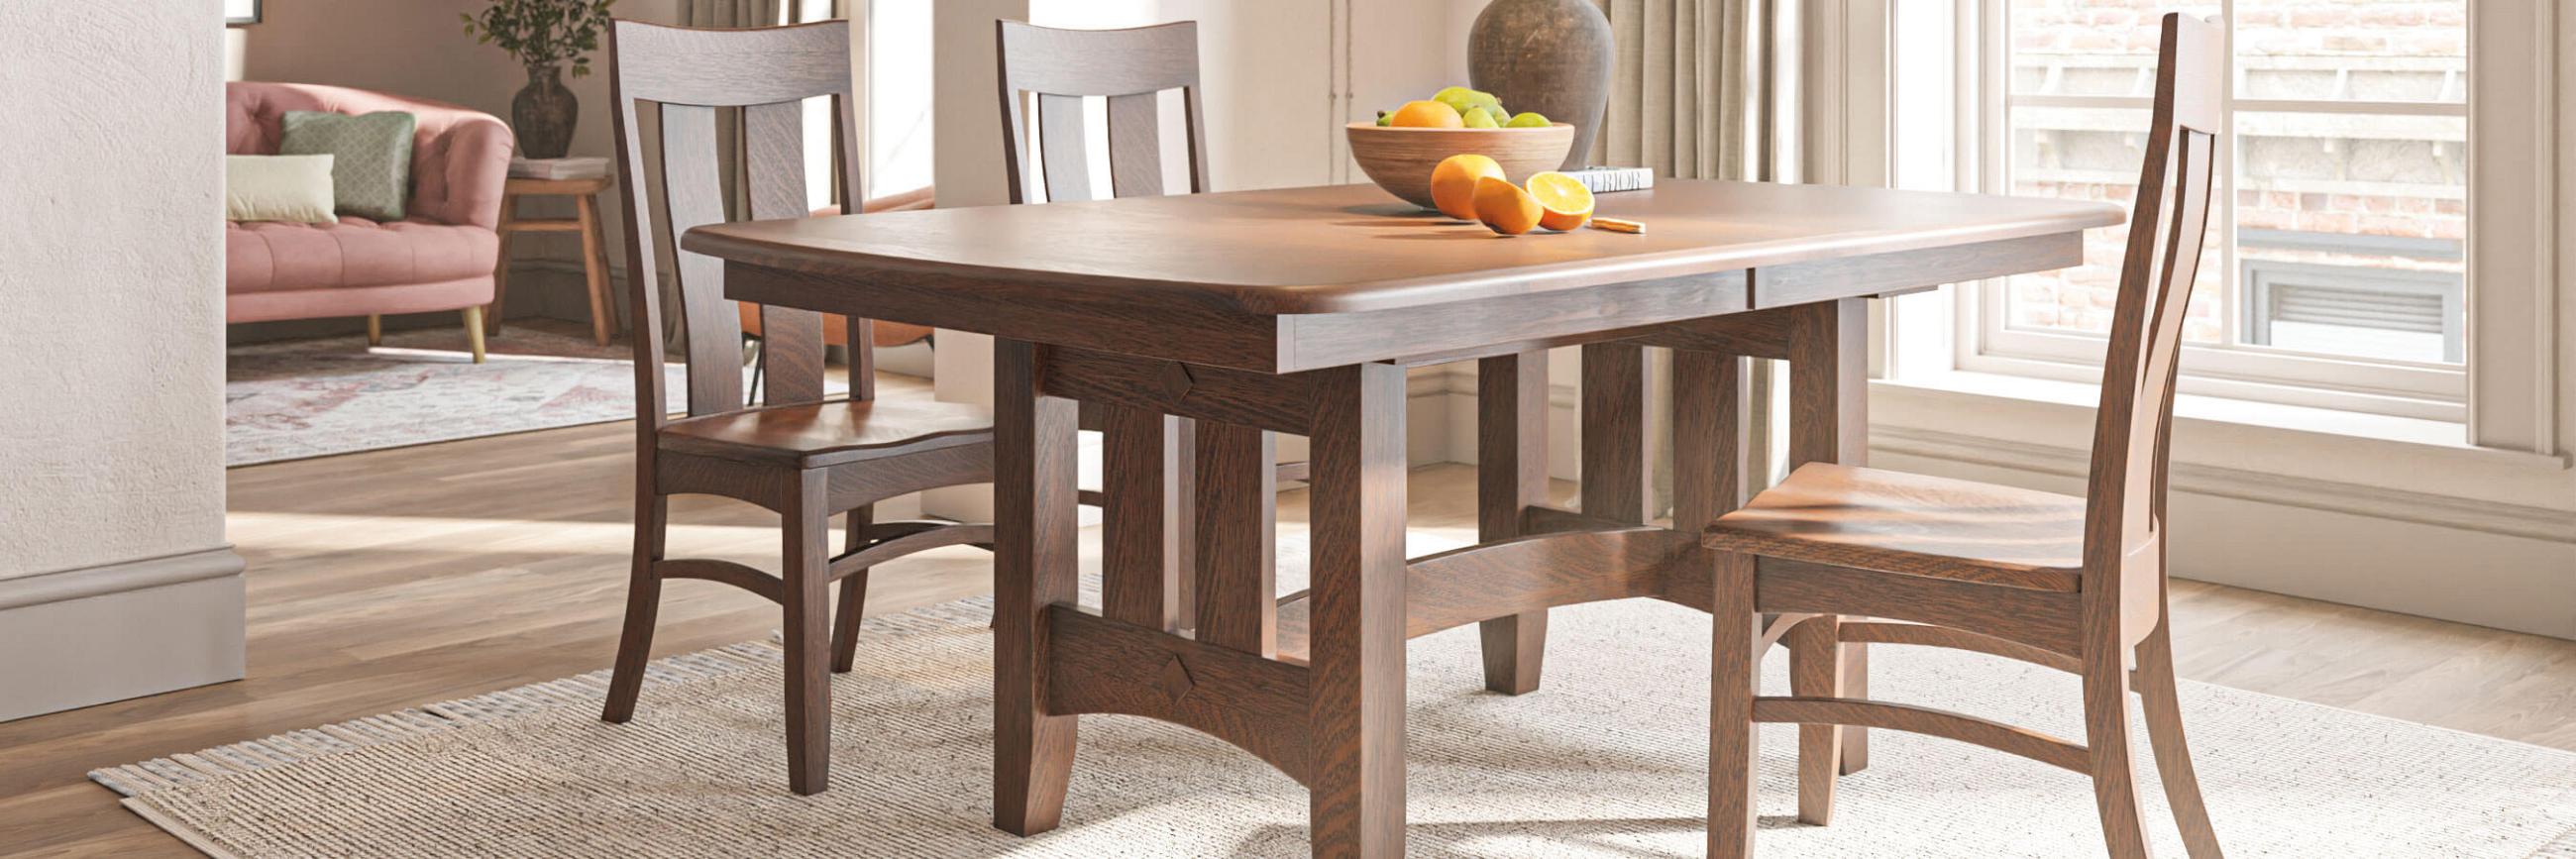 West Point Woodworking Dining Room Furniture Setting